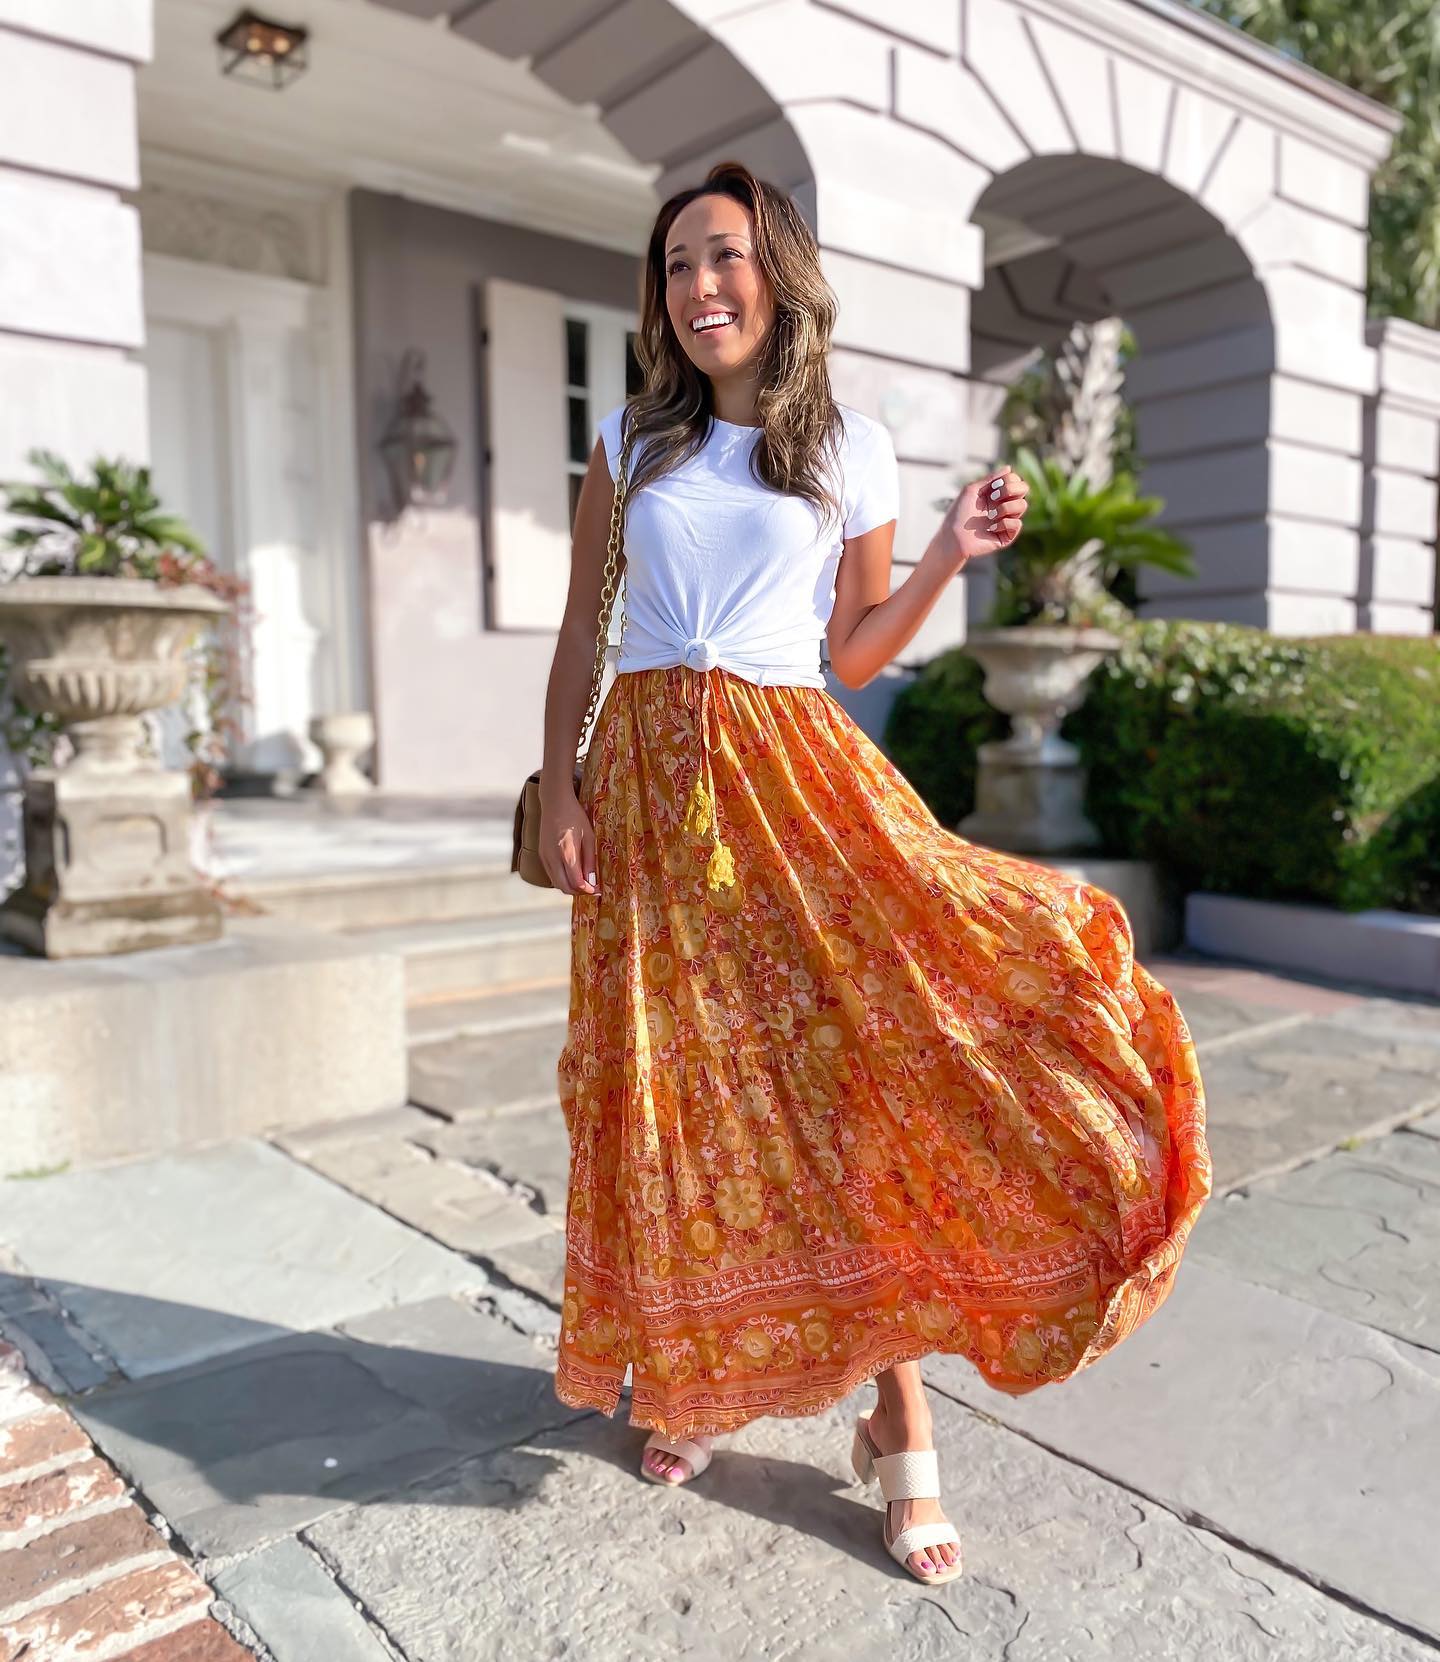 How to Wear Maxi Skirts? 24 Outfit Ideas and Tips